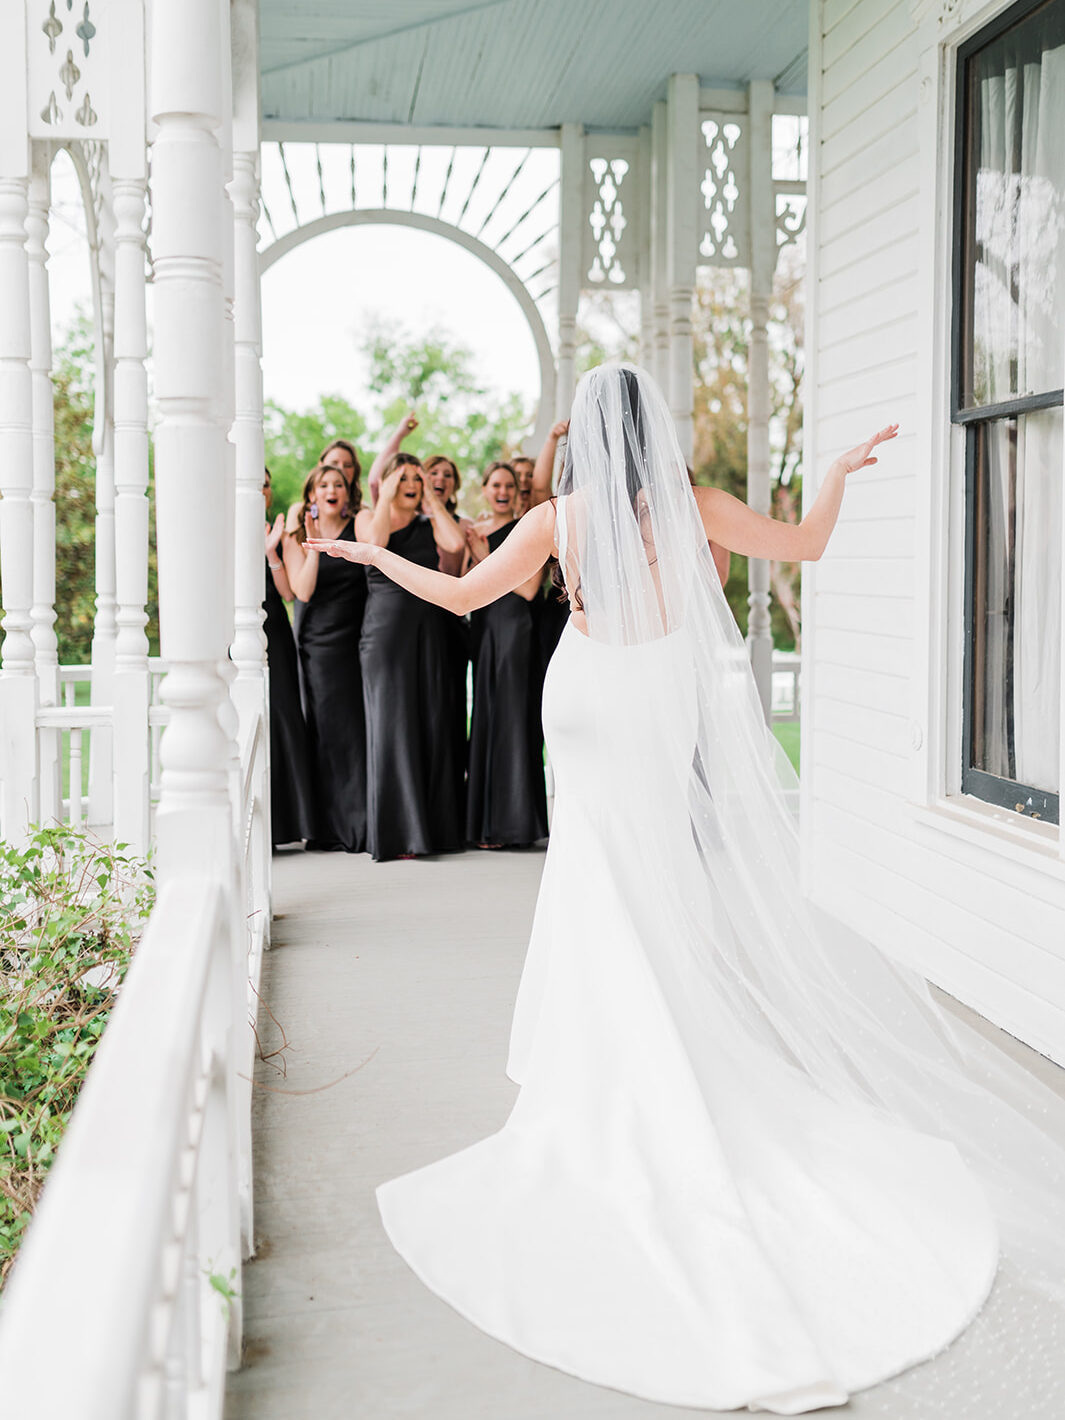 Bride revealing her gown to her bridesmaids at Barr Mansion